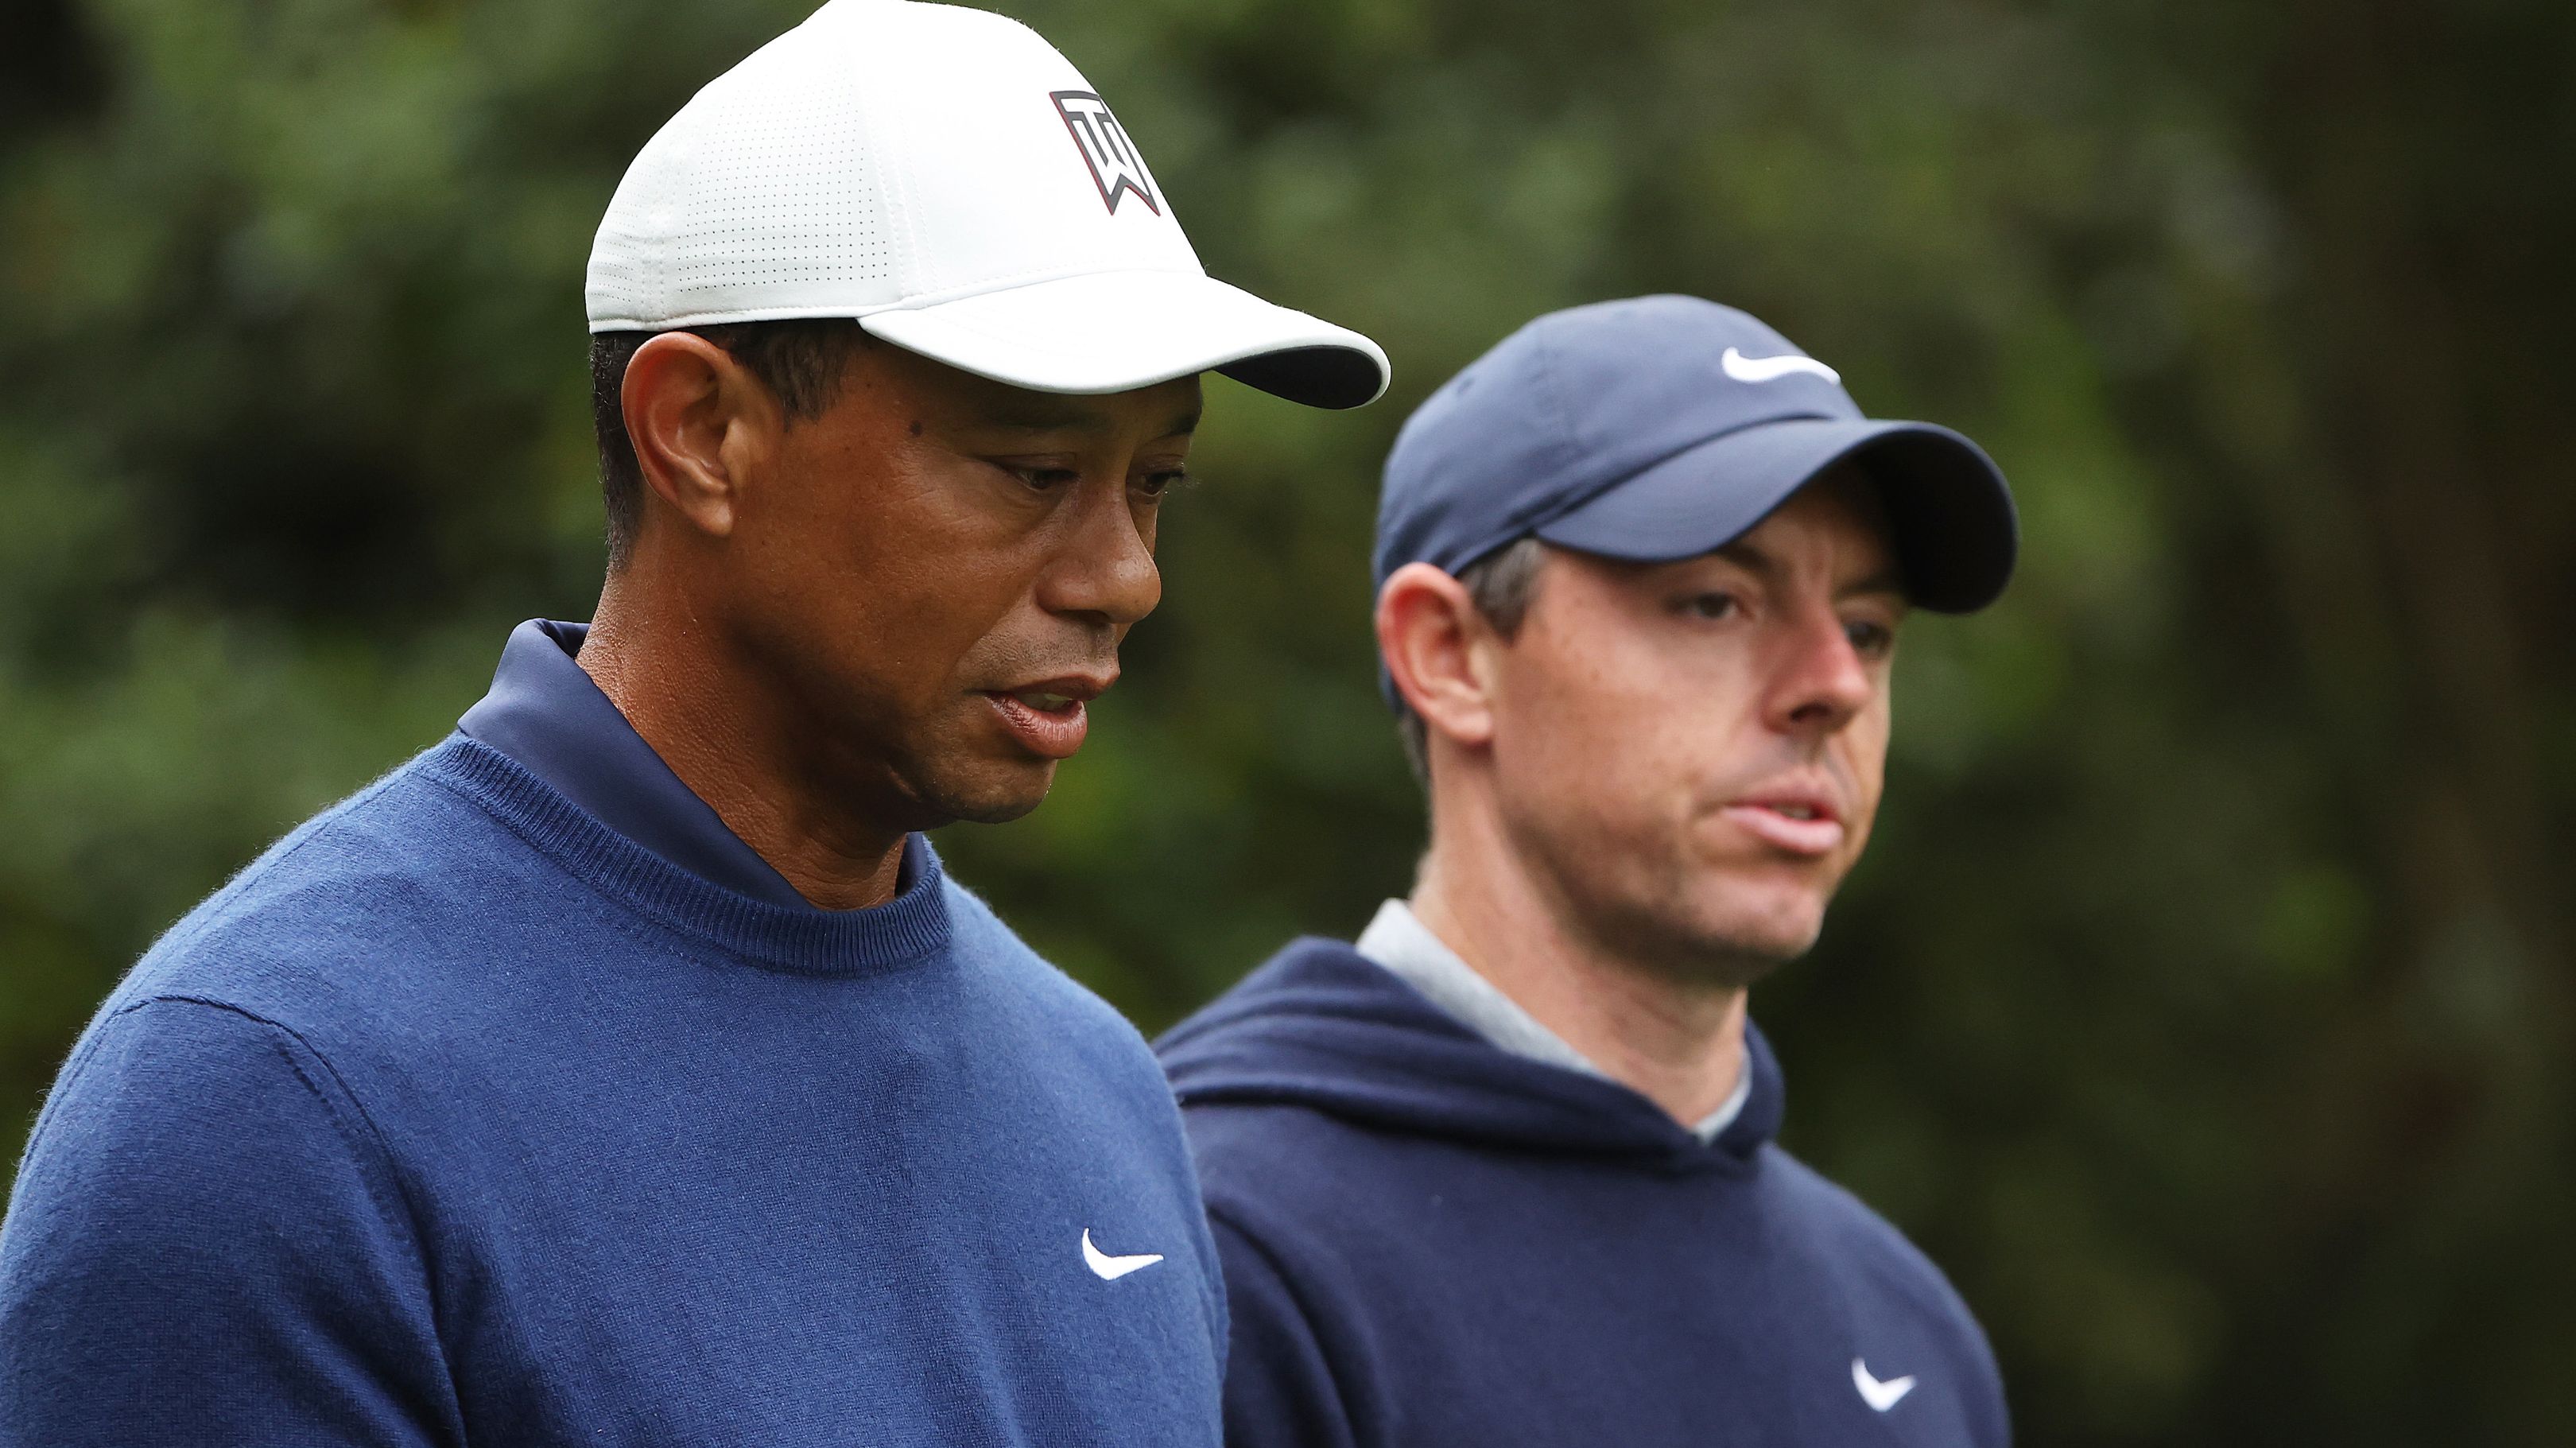 Tiger Woods of the United States and Rory McIlroy of Northern Ireland.